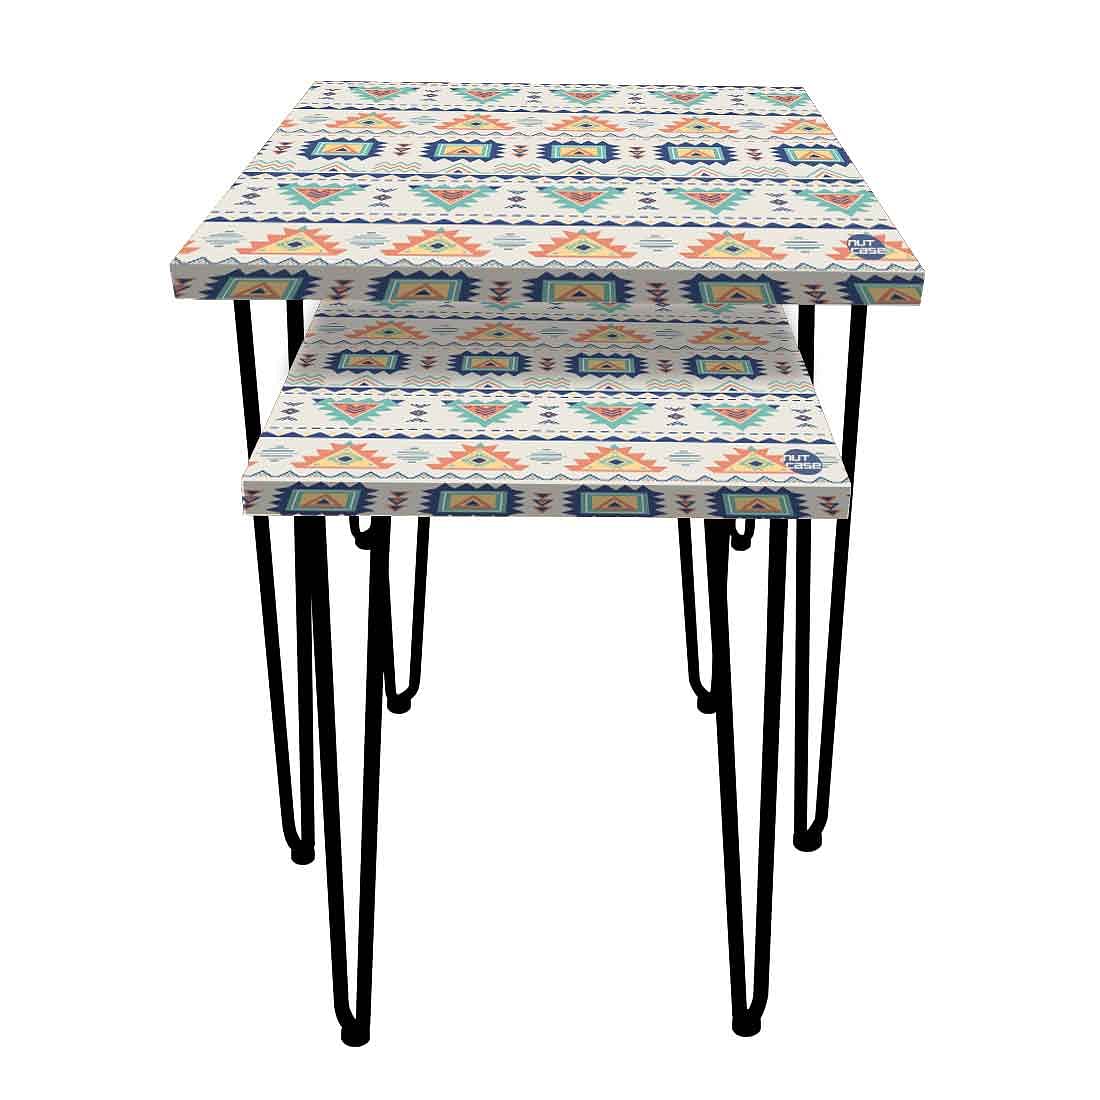 Multi-usable Nest of 2-Coffee Tables For Living Room, Bedroom and Patio - Aztec Grey Pattern Nutcase